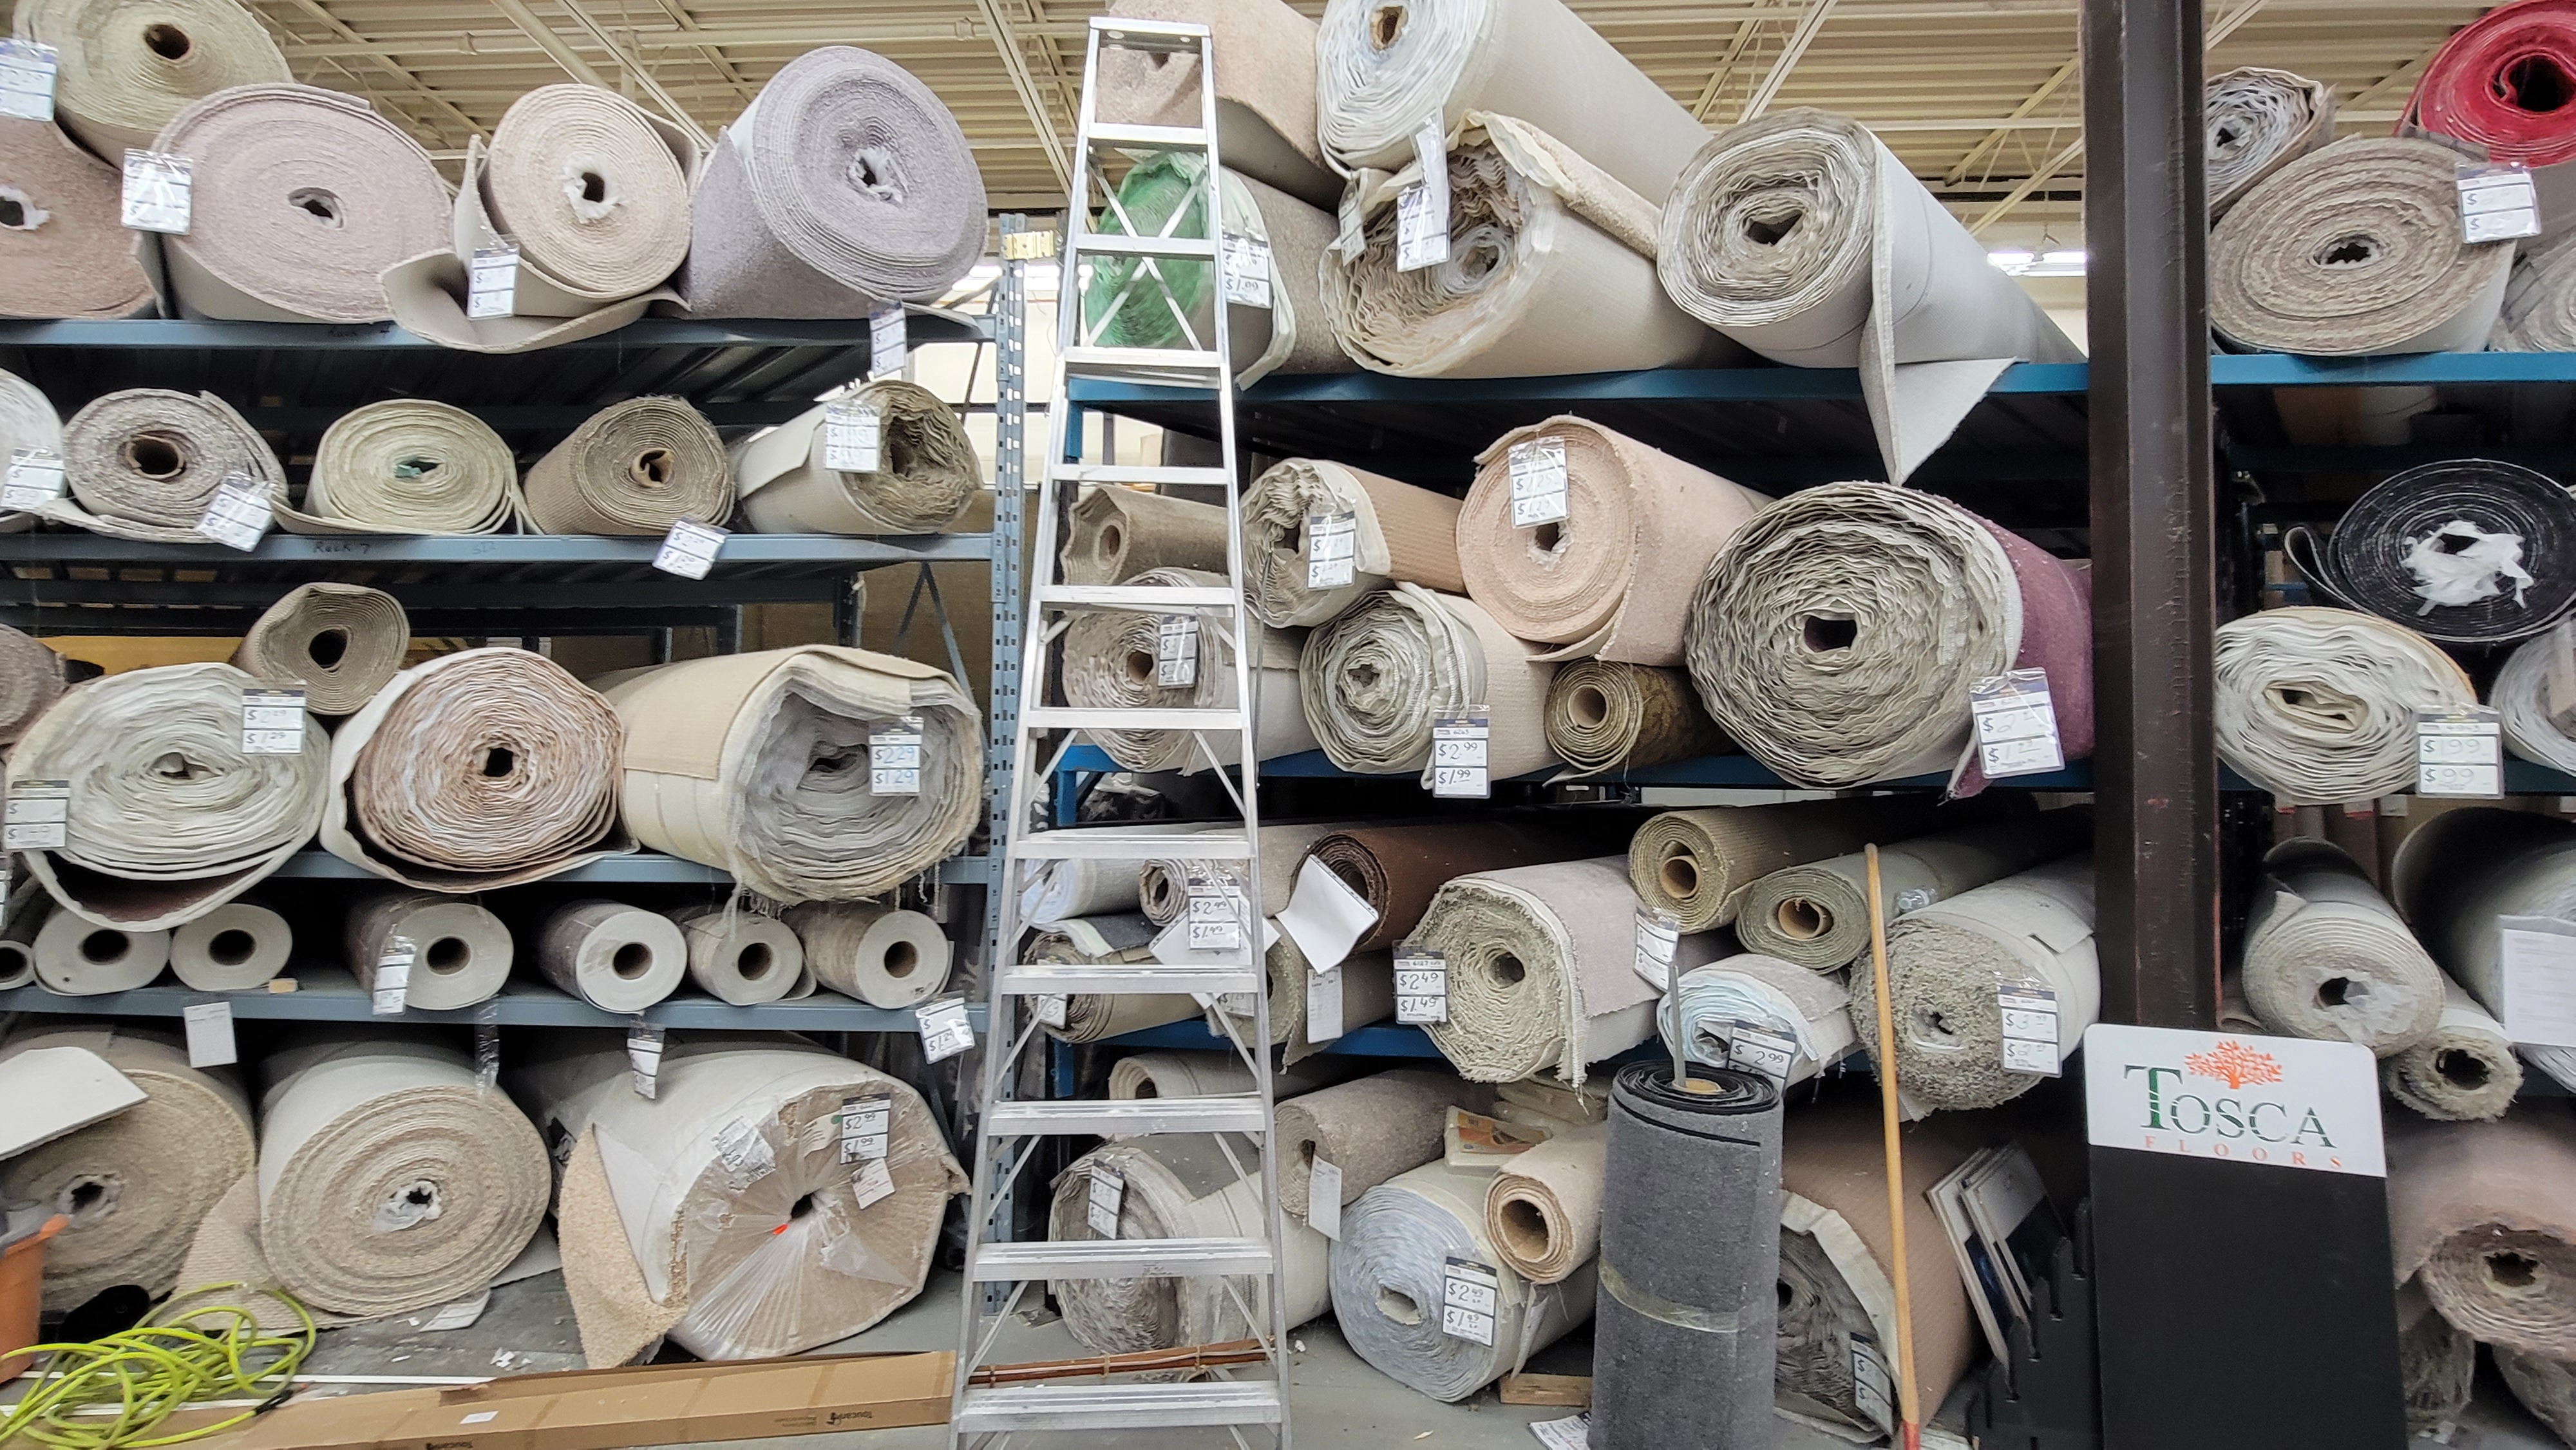 Residential Carpet Sales and Installation in GTA Toronto, Etobicoke and Missisauga